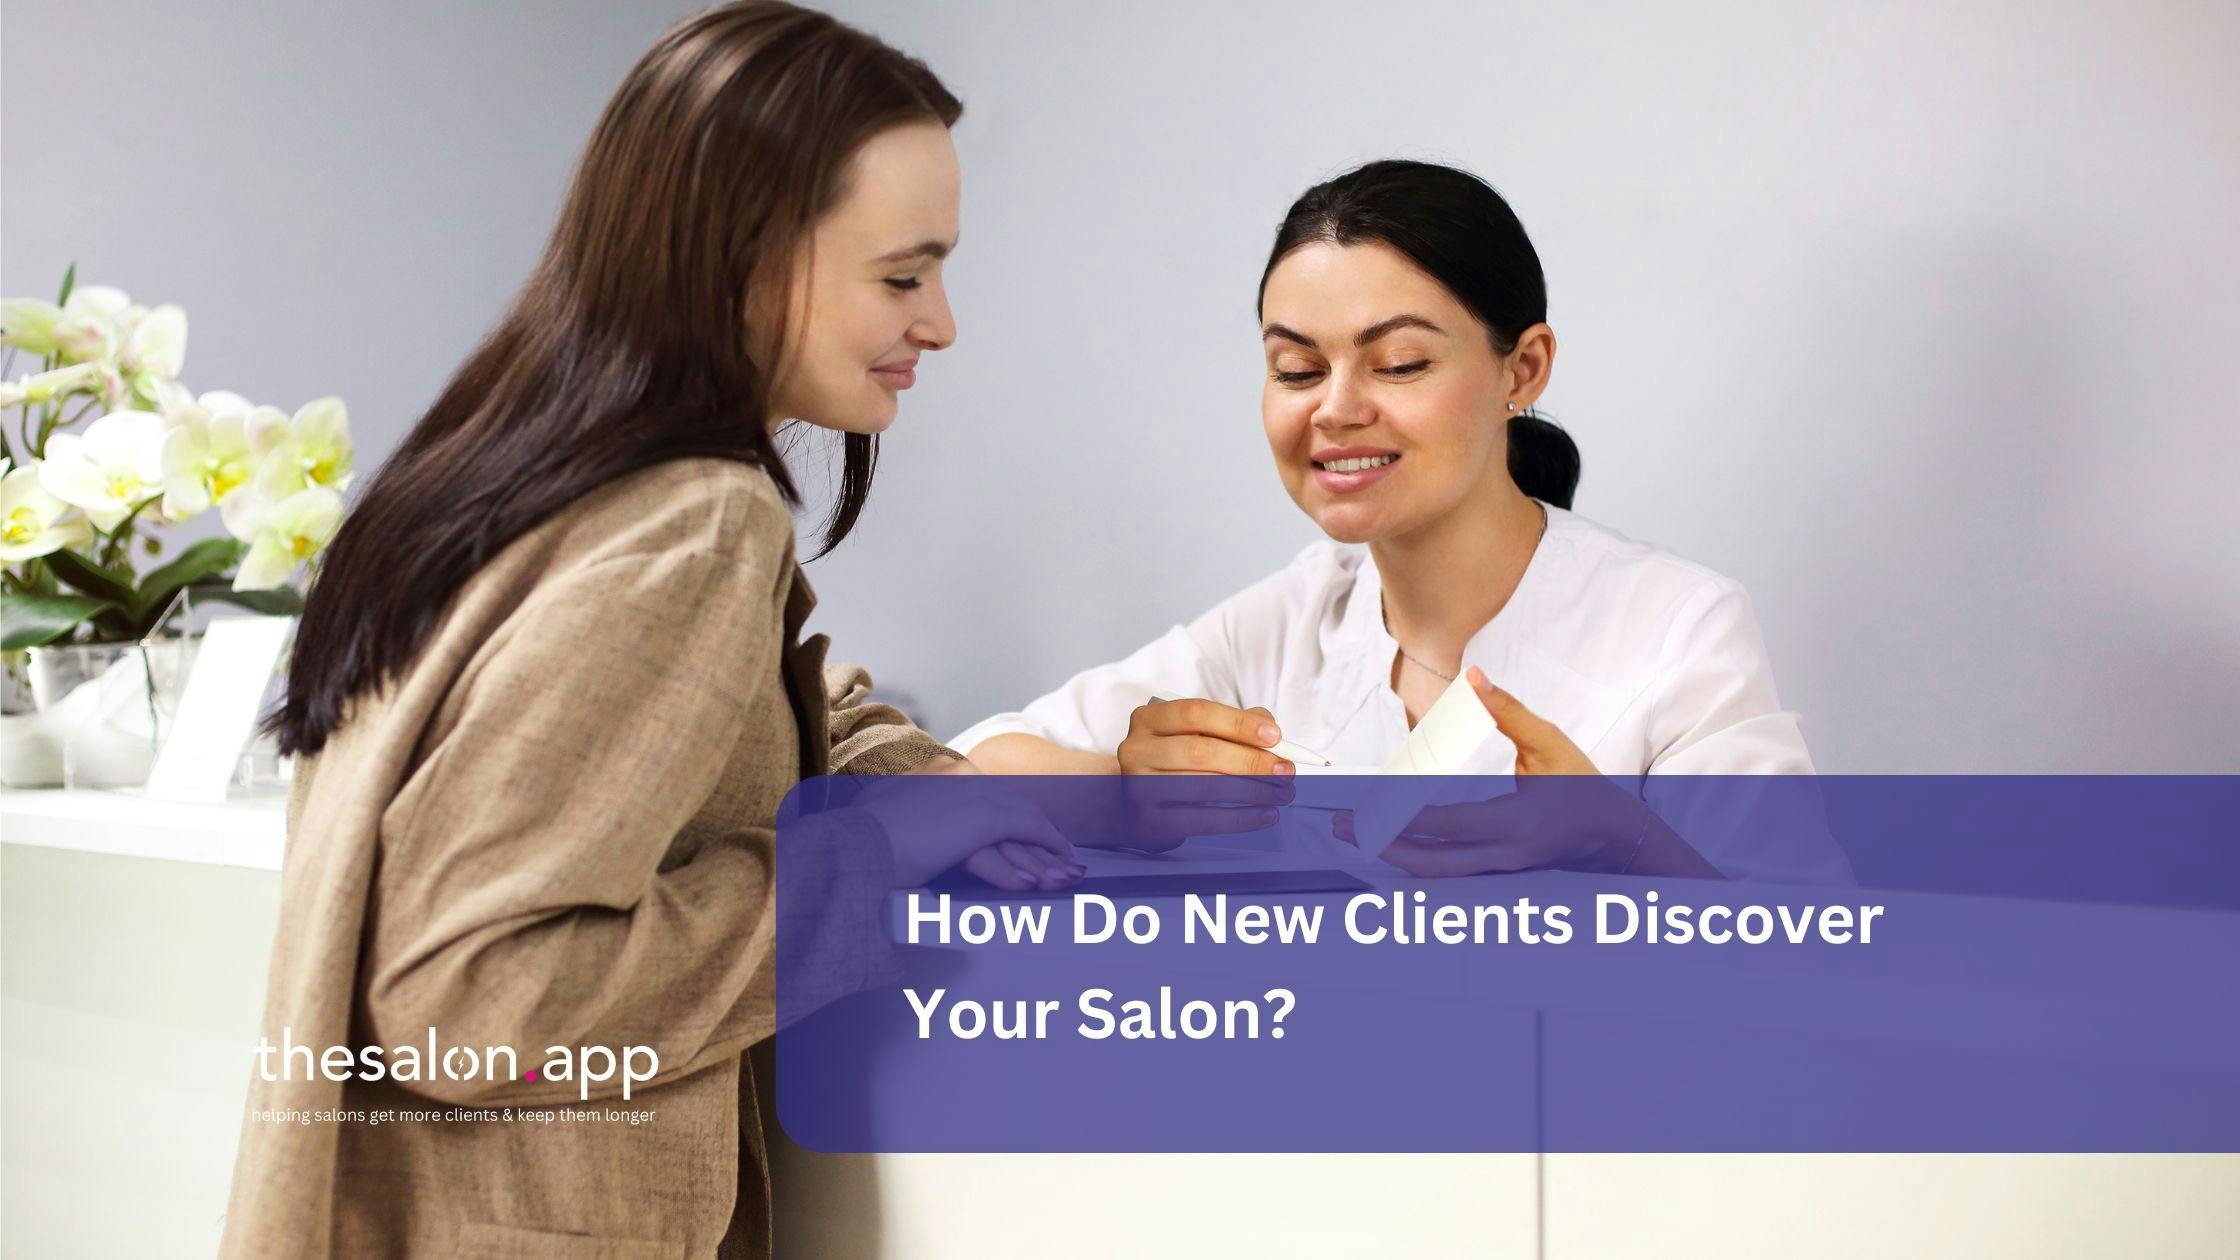 How Do New Clients Discover Your Salon?